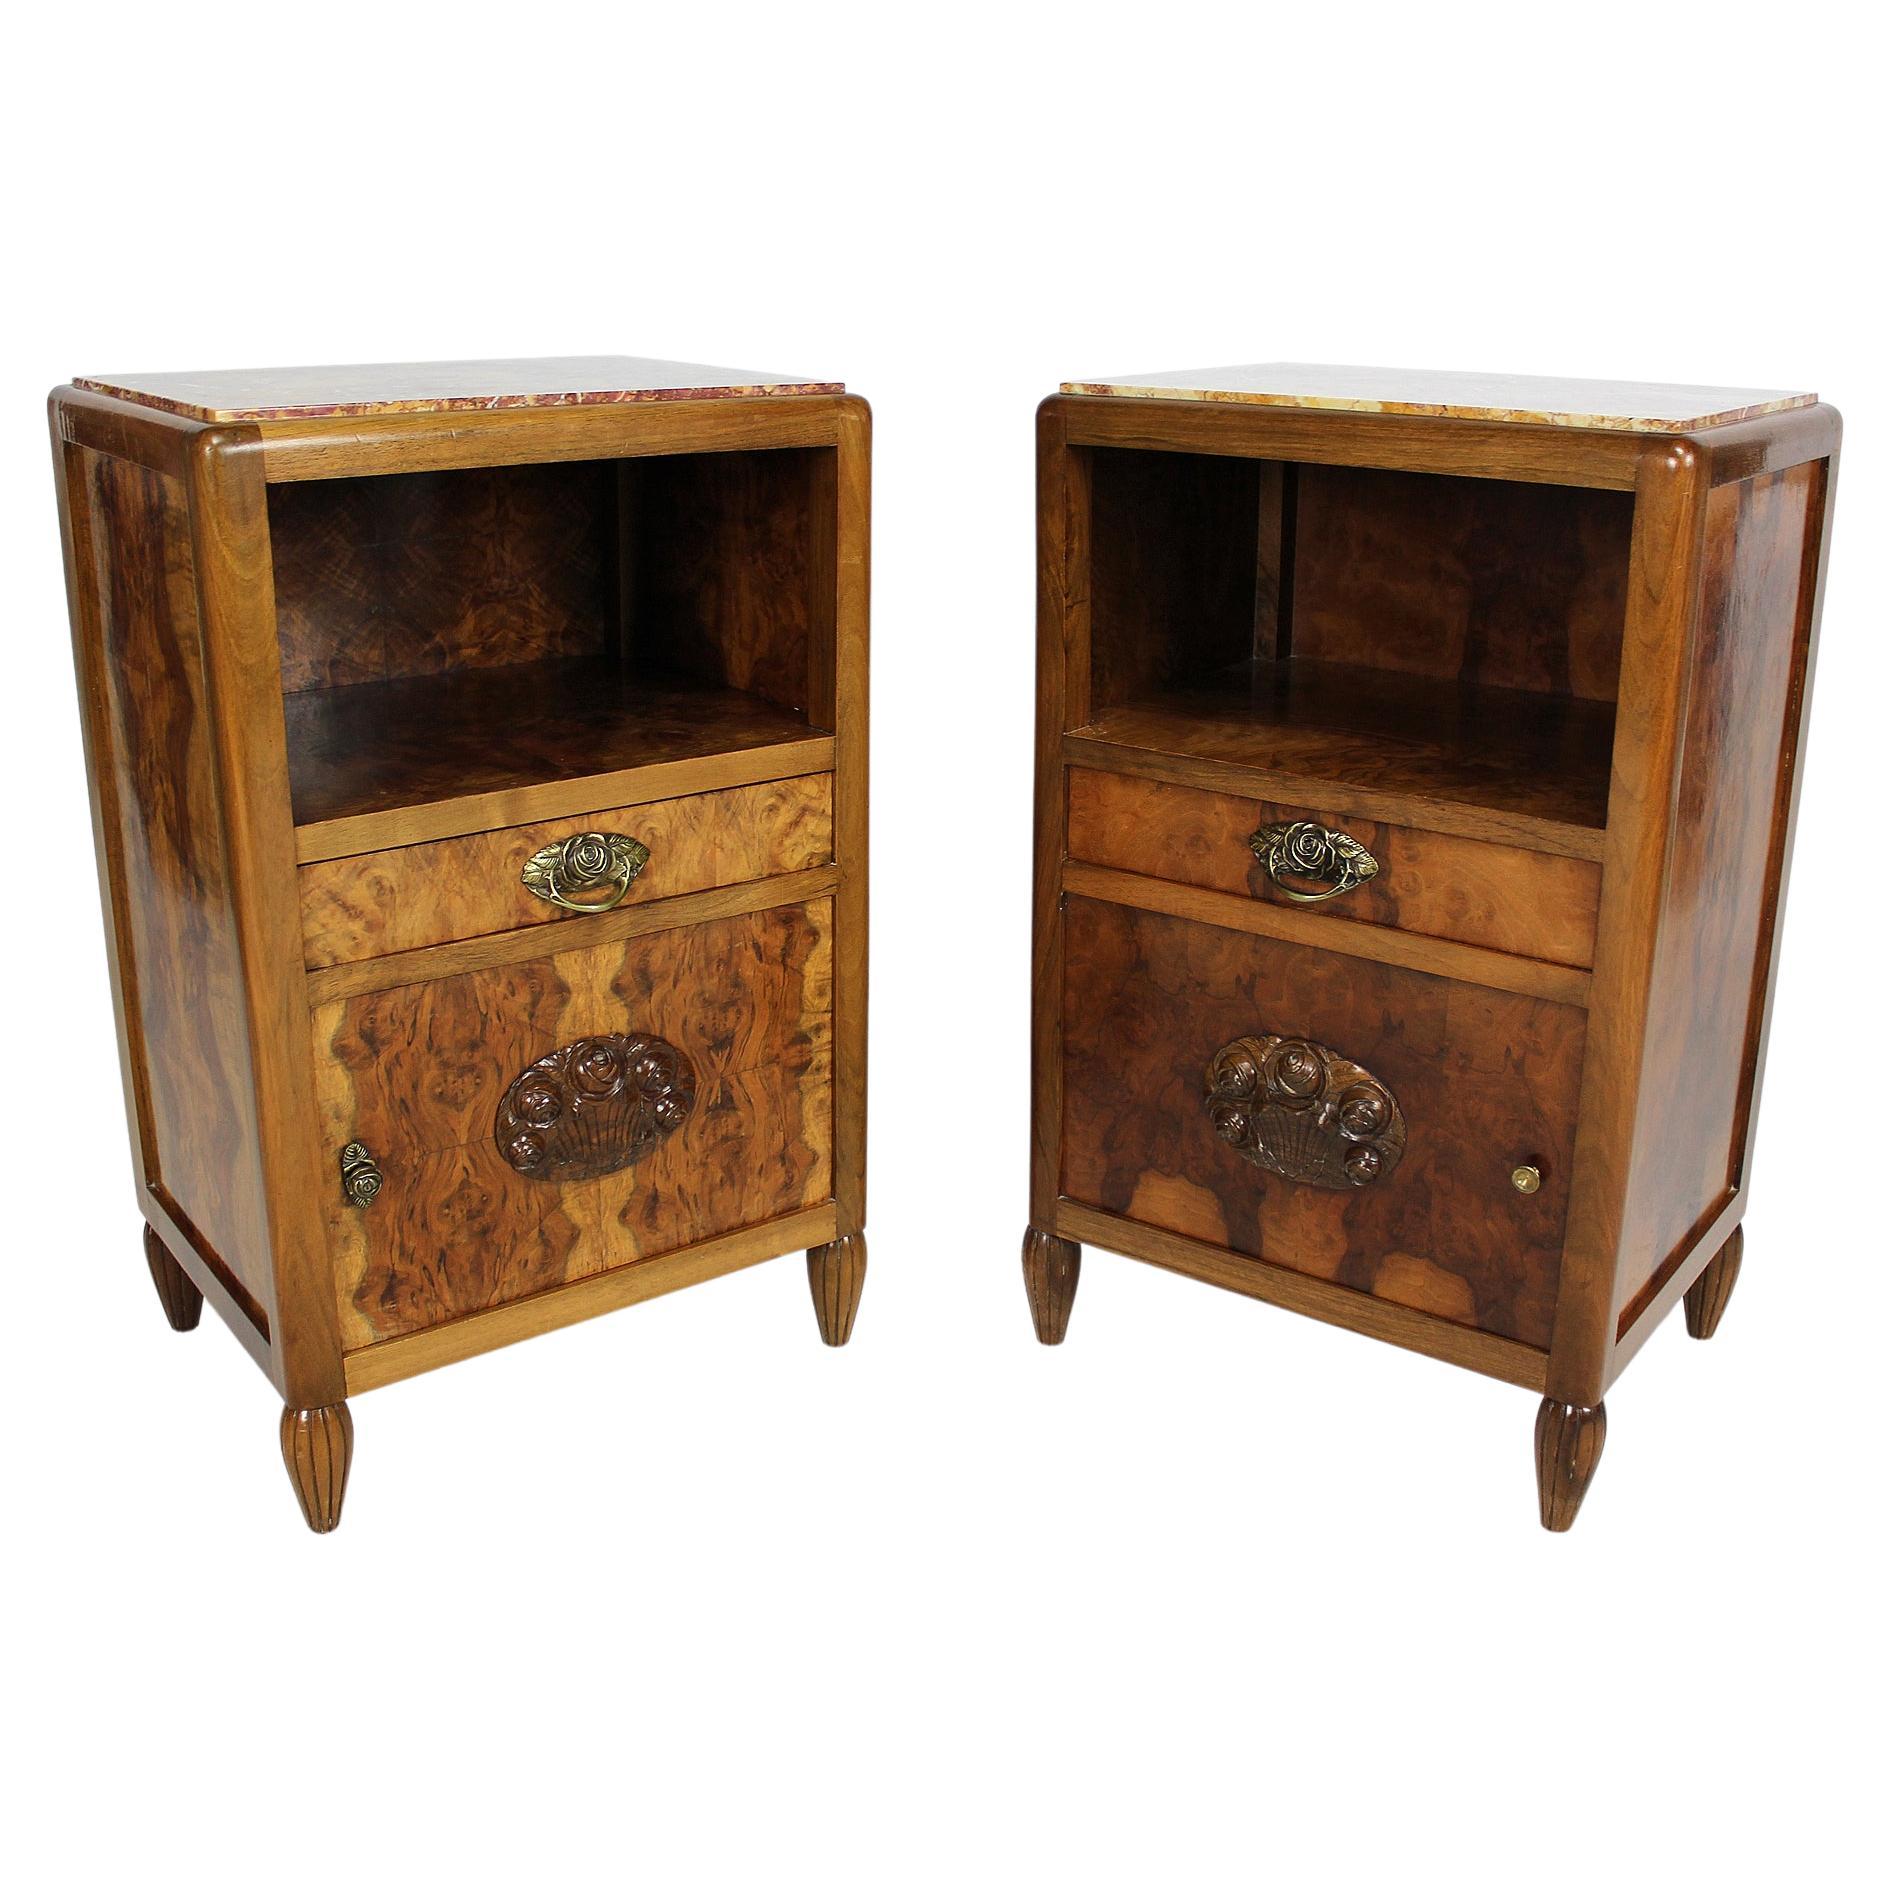 Pair of Art Deco Bedside Tables by Ateliers Gauthier-Poinsignon, circa 1920-1930